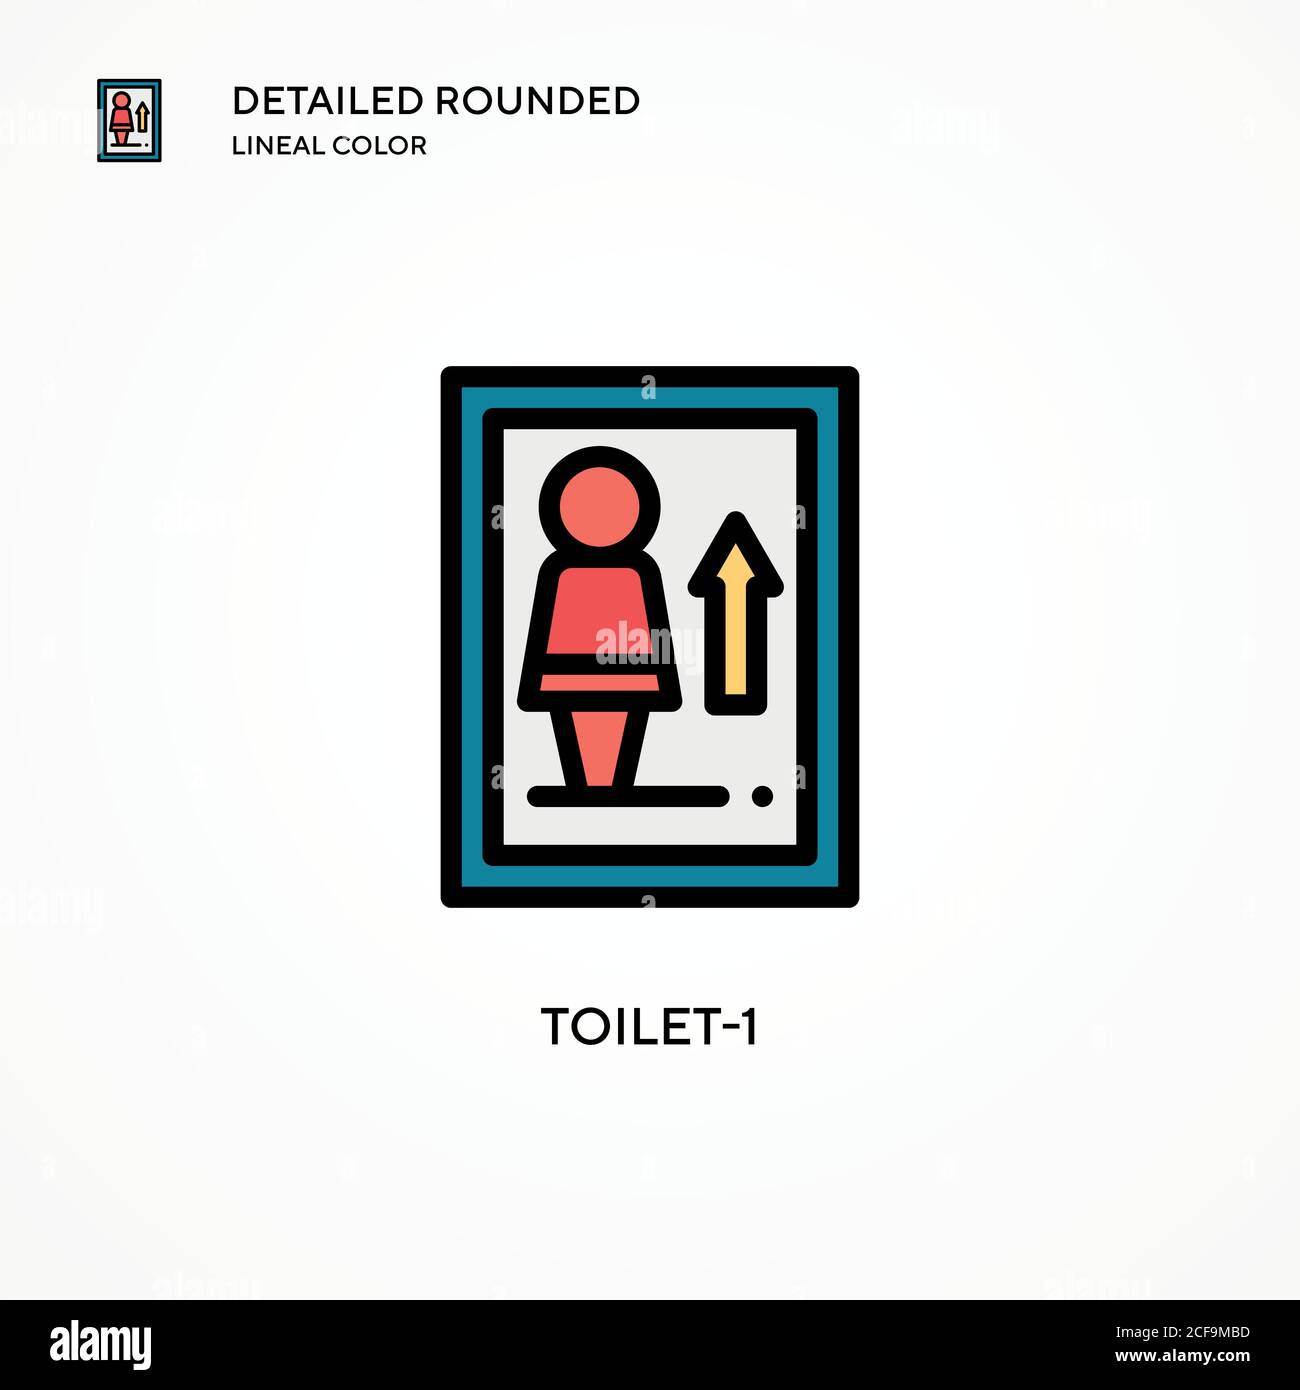 Toilet-1 vector icon. Modern vector illustration concepts. Easy to edit and customize. Stock Vector